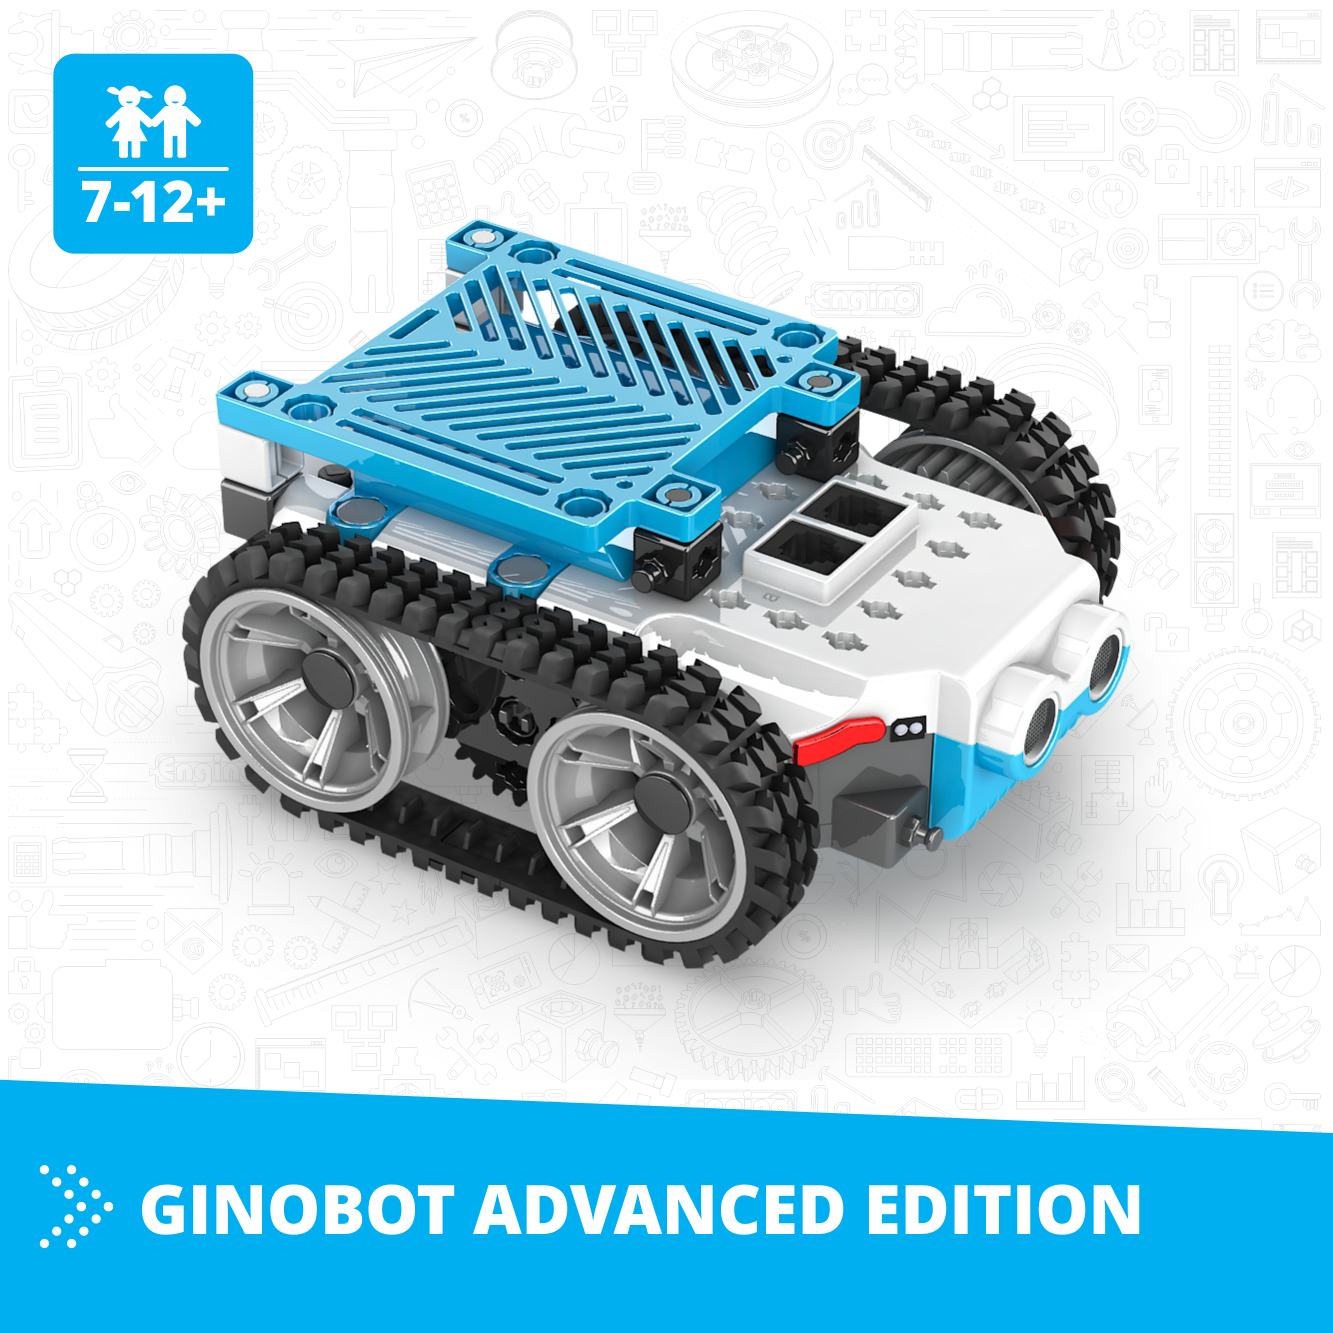 GINOBOT Advanced Edition - Engino's innovative building and construction kit.